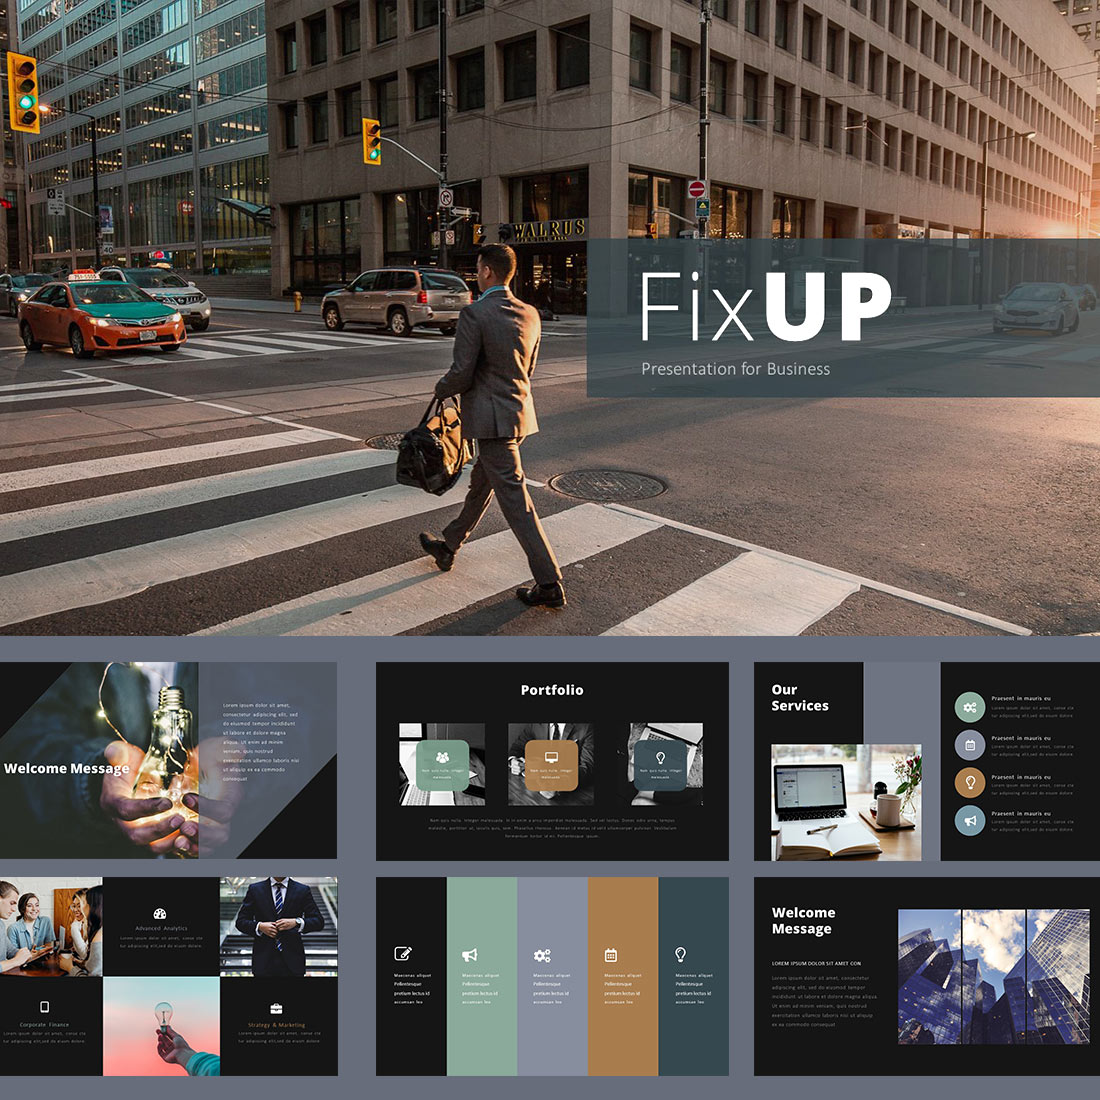 FixUp - Presentation for Business cover image.